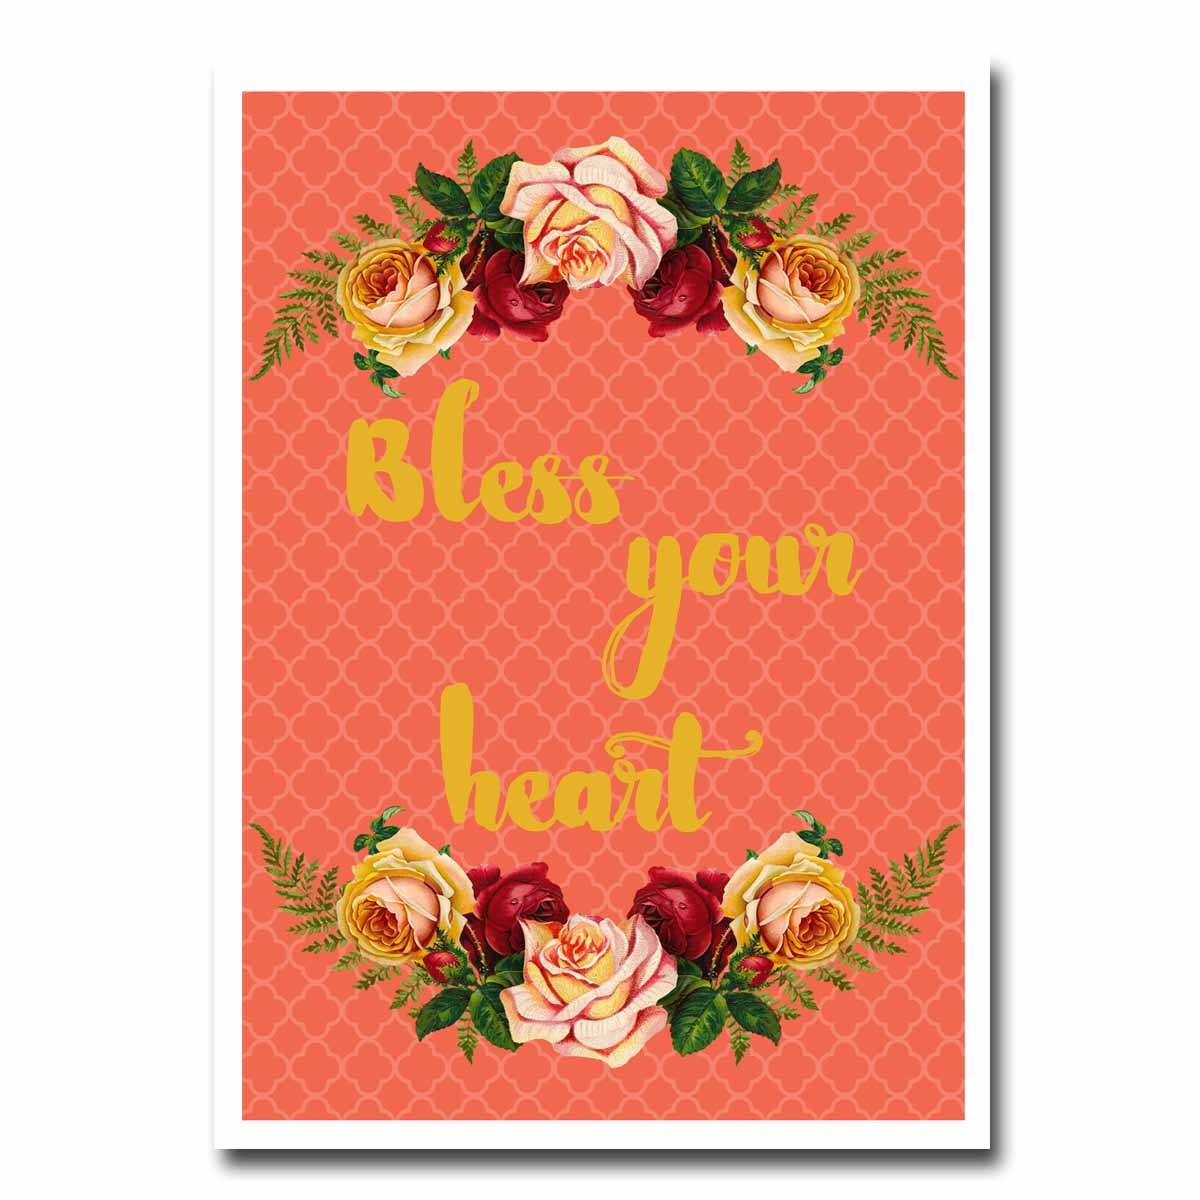 Bless Your Heart Blank Greeting Card